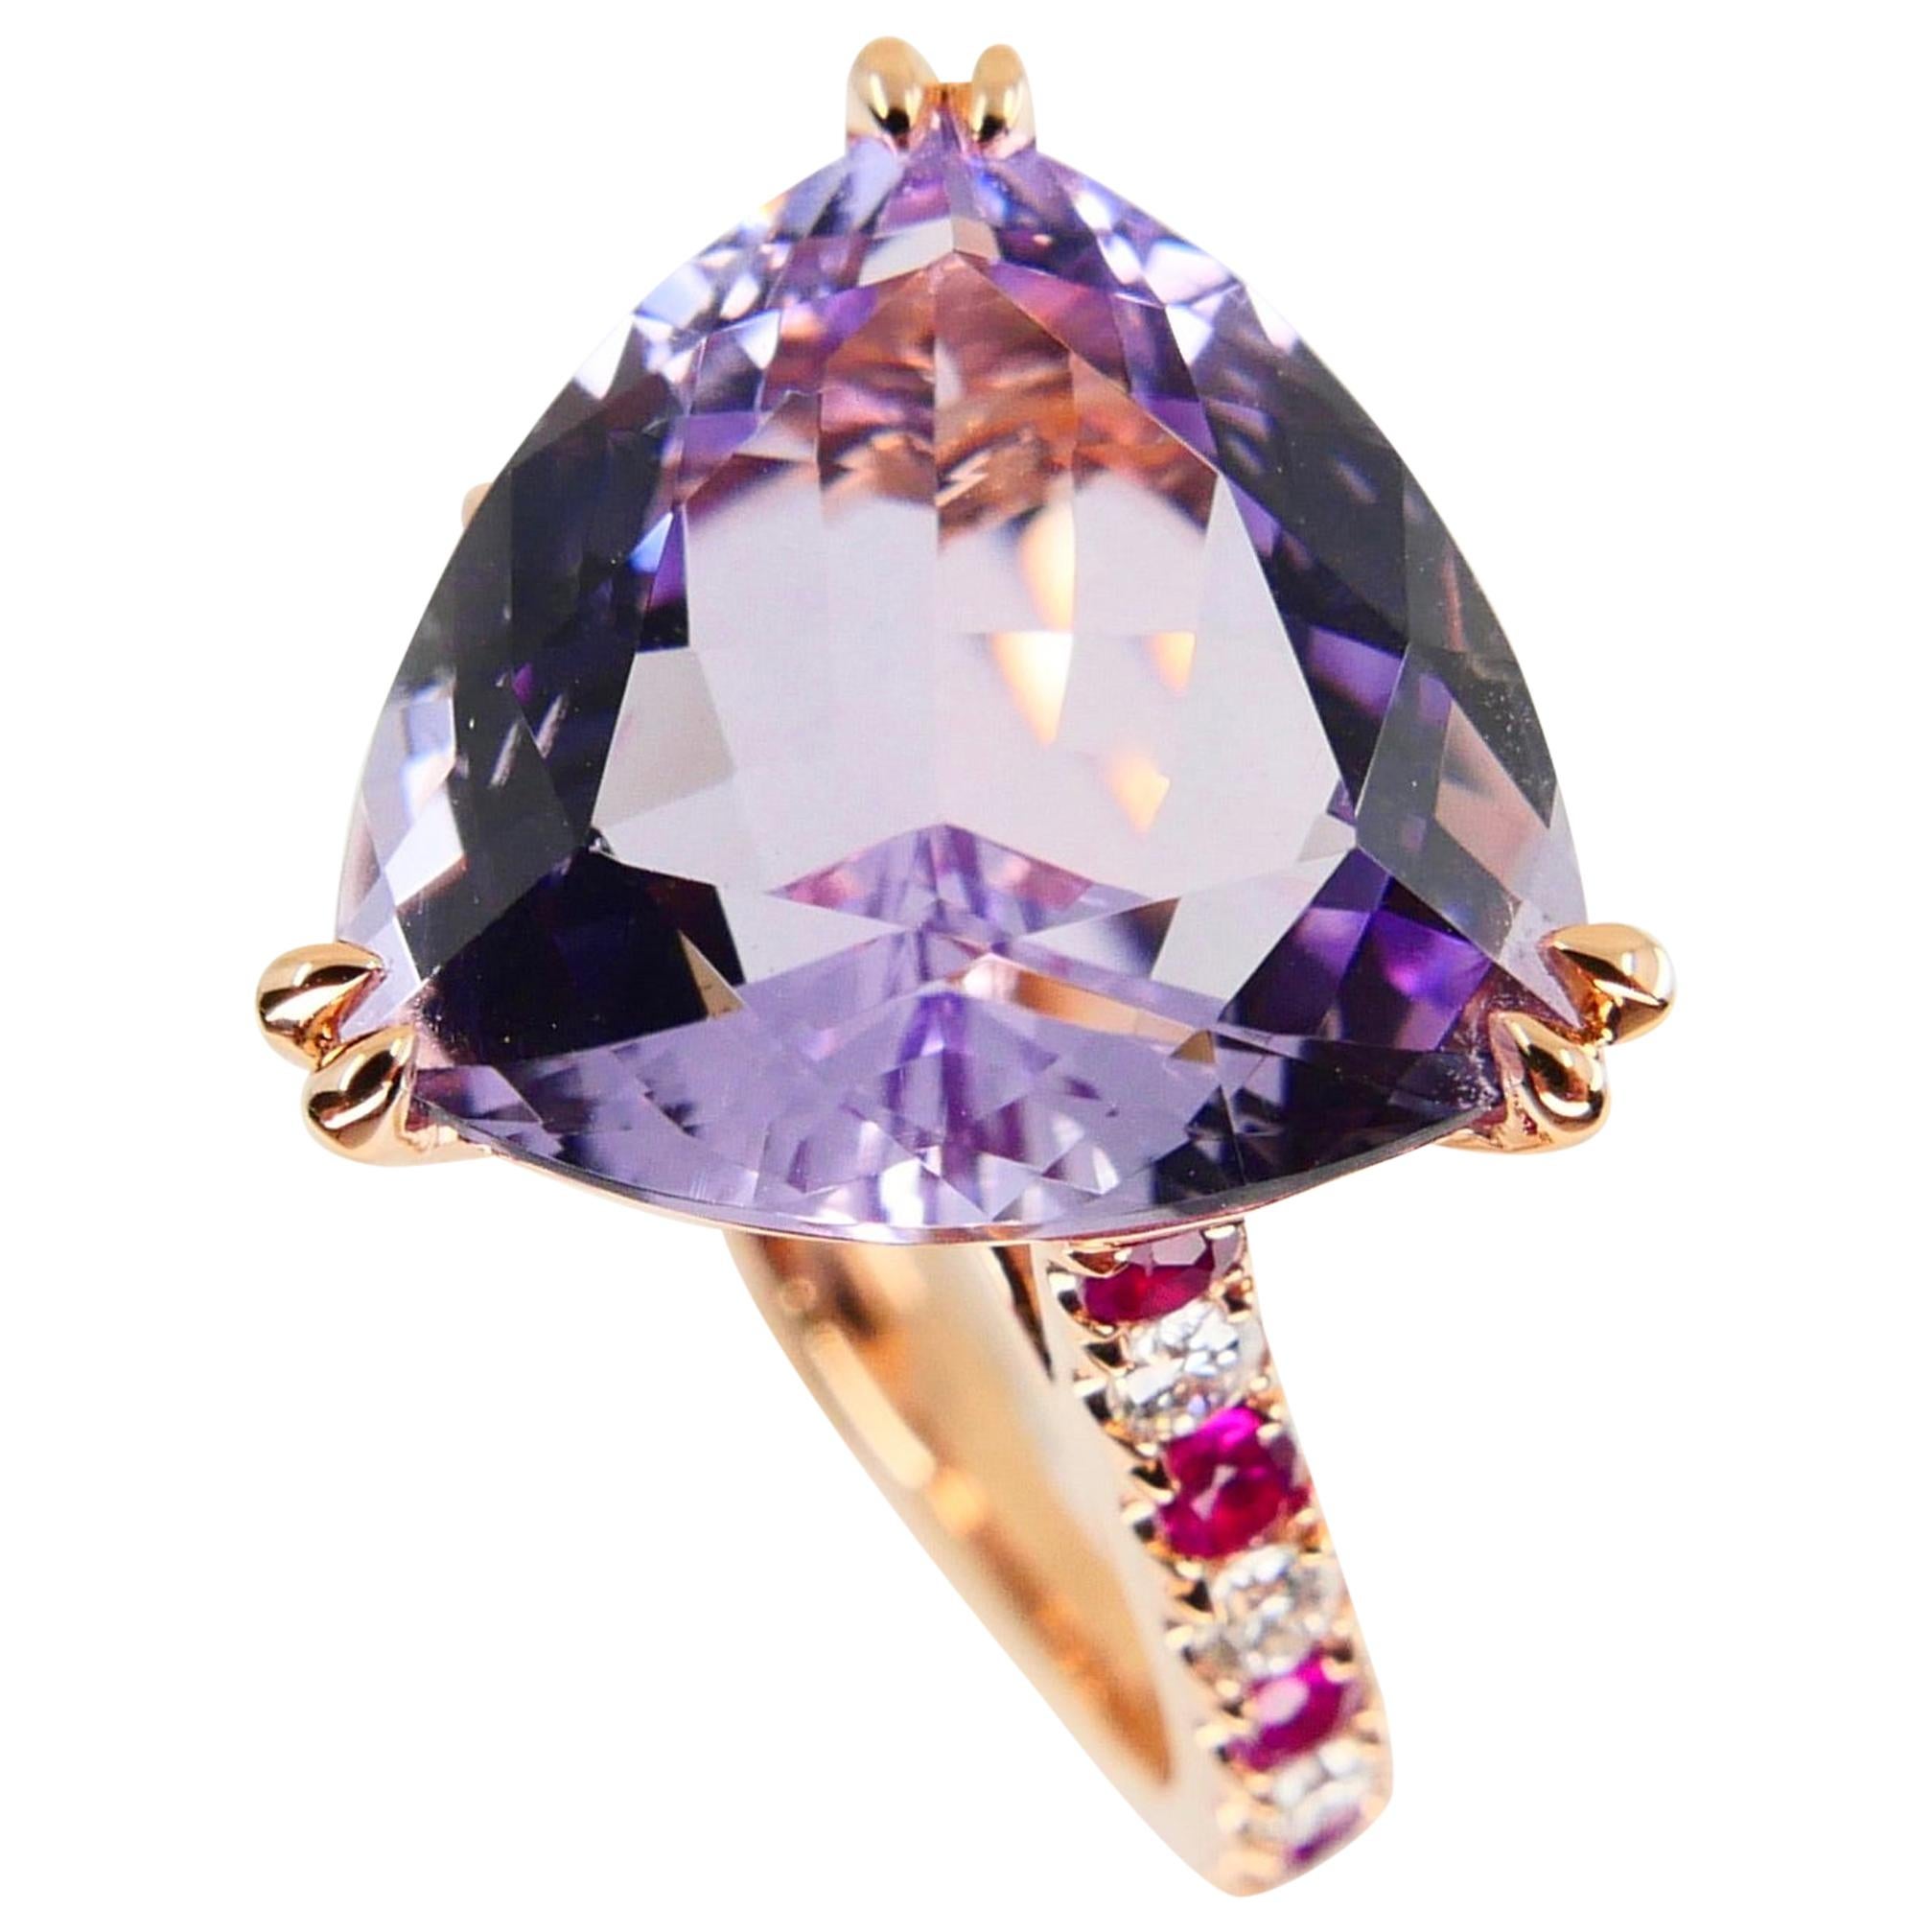 6.28 Carat Trillion Cut Amethyst, Ruby and Diamond Cocktail Ring, 18k Rose Gold